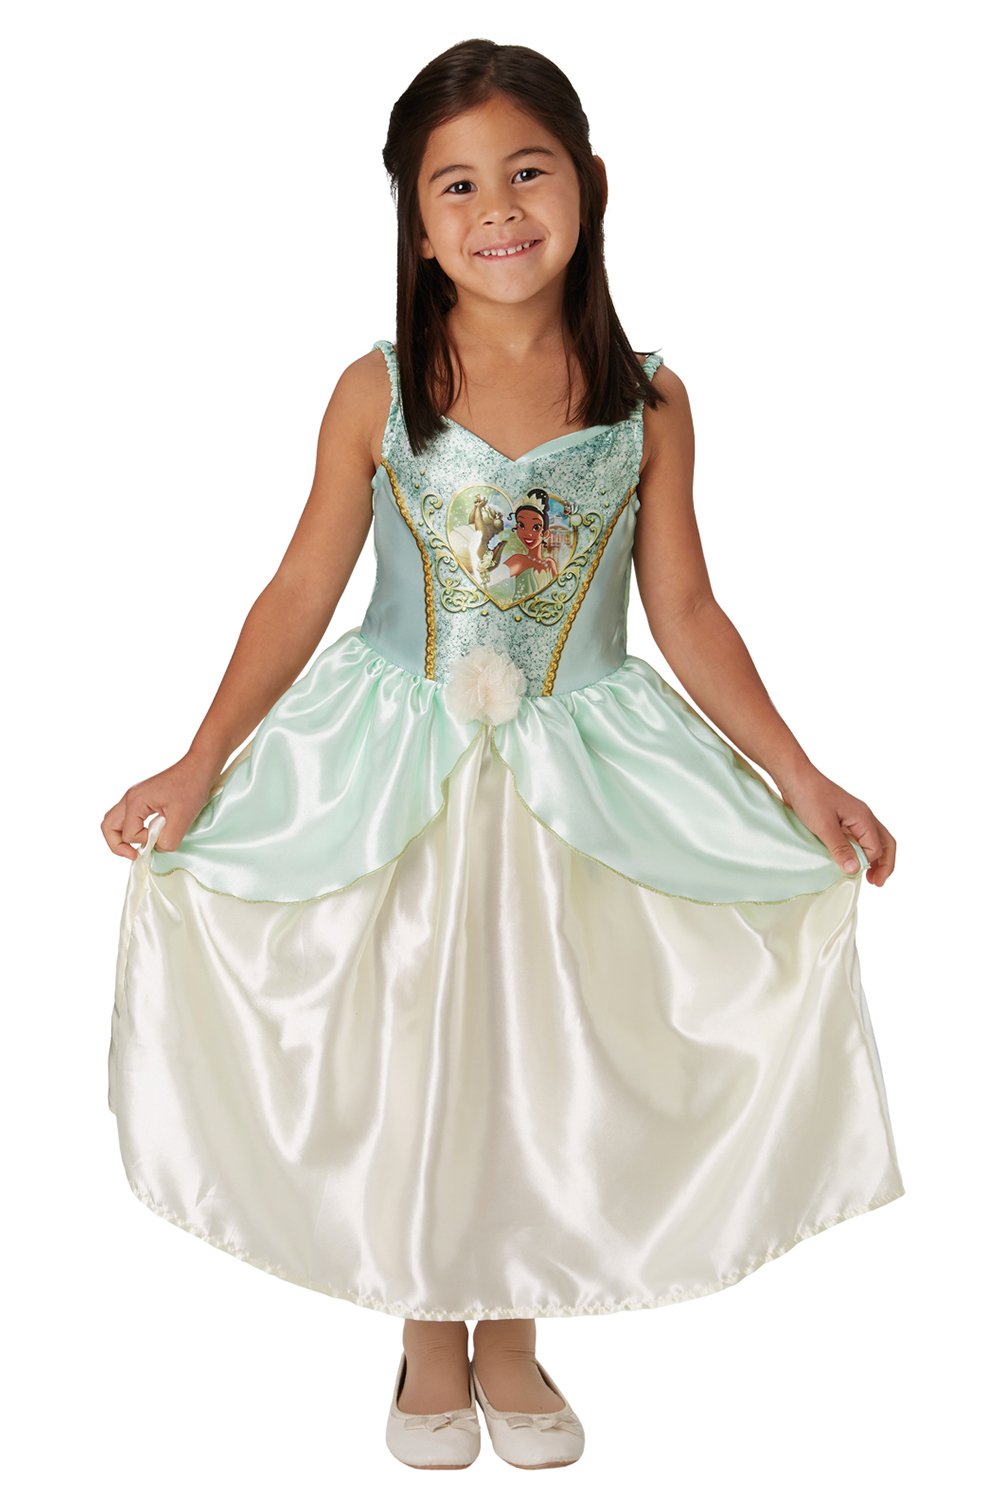 Rubies-Costumes-Disney-Princess-and-the-Frog-Sequin-Tiana